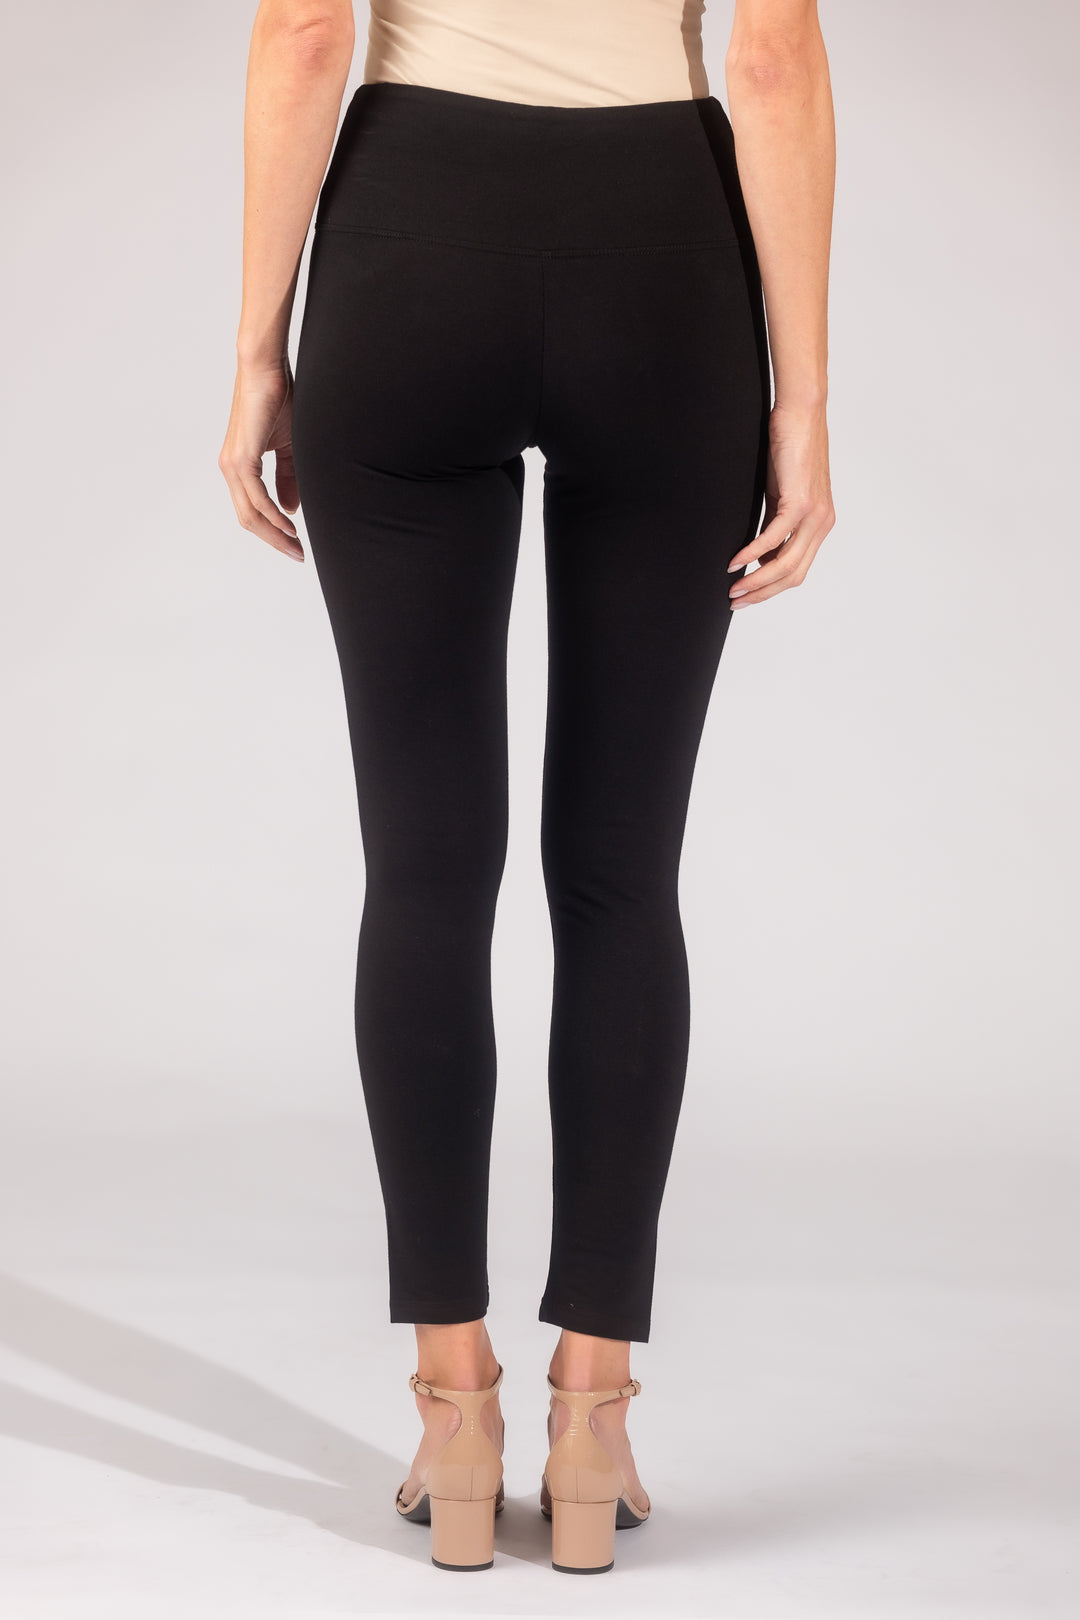 ComfyChic DuoFlex Leggings: Move Freely, Look Effortlessly Chic!